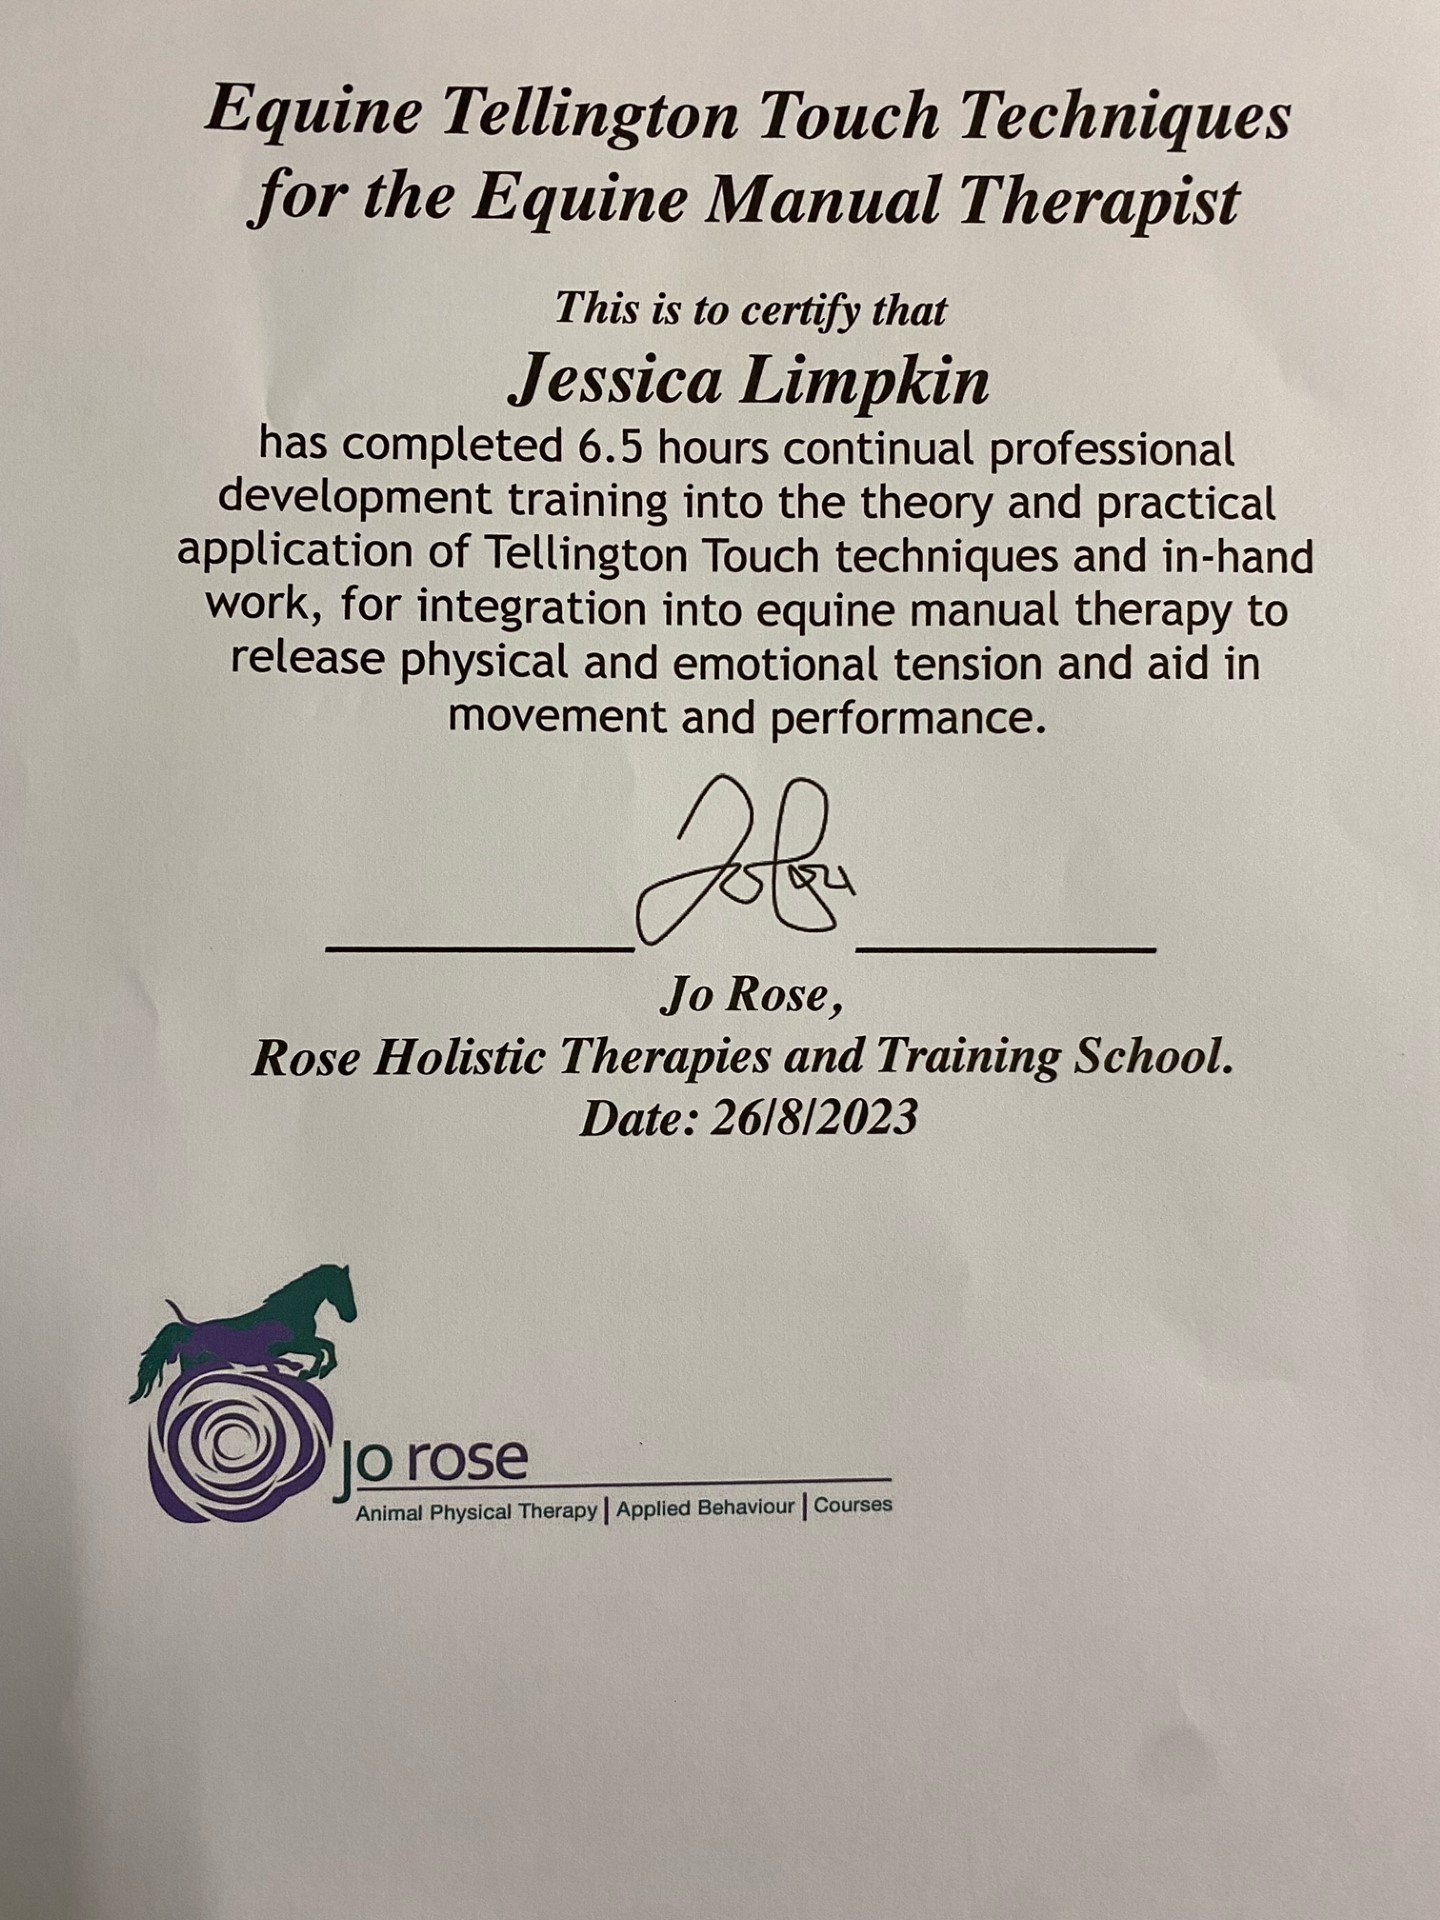 jessica_limpkin_equine_horse_massage_therapy_therapist_worcester_worcestershire_t_touch_cpd_training_rose_therapies.jpg